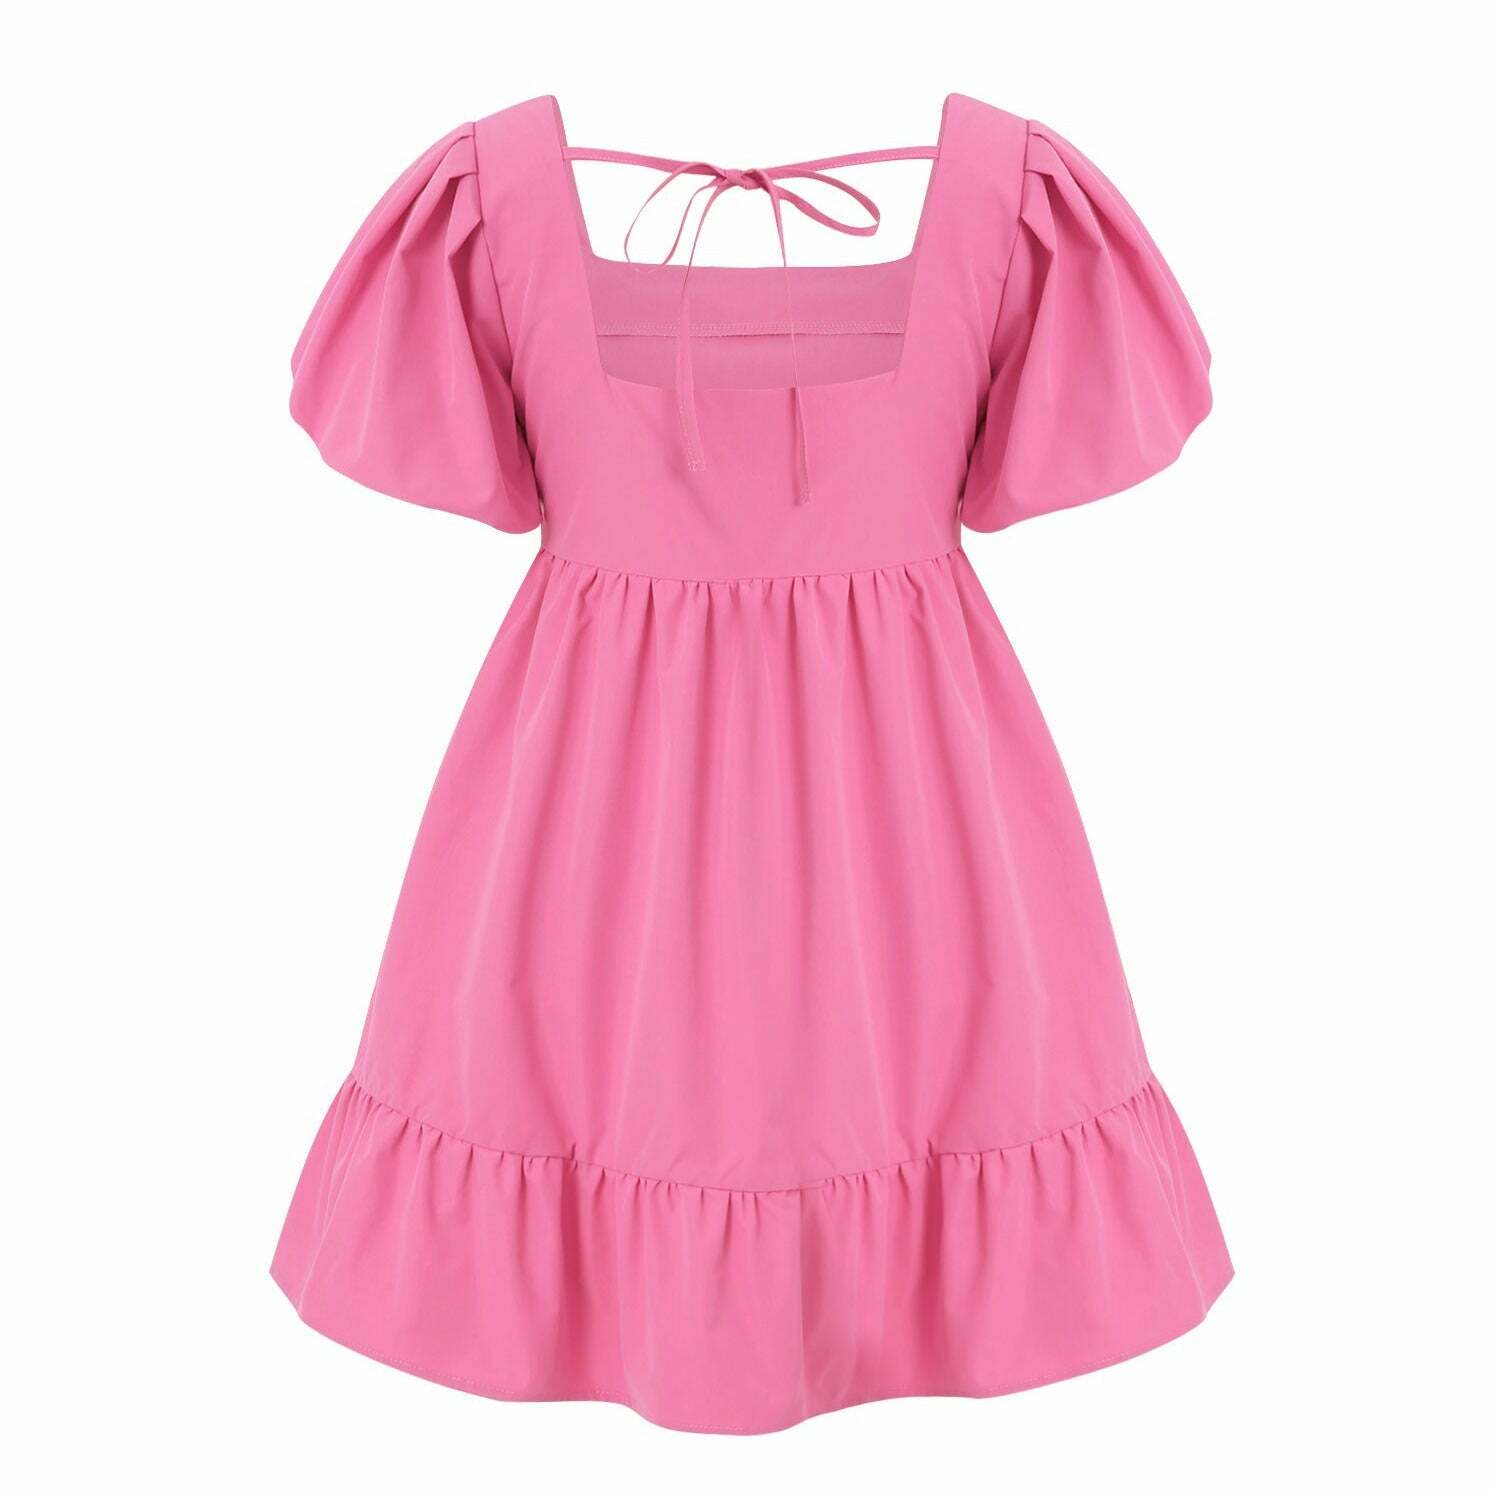 french girl inspired mini dress chic & youthful style 4272